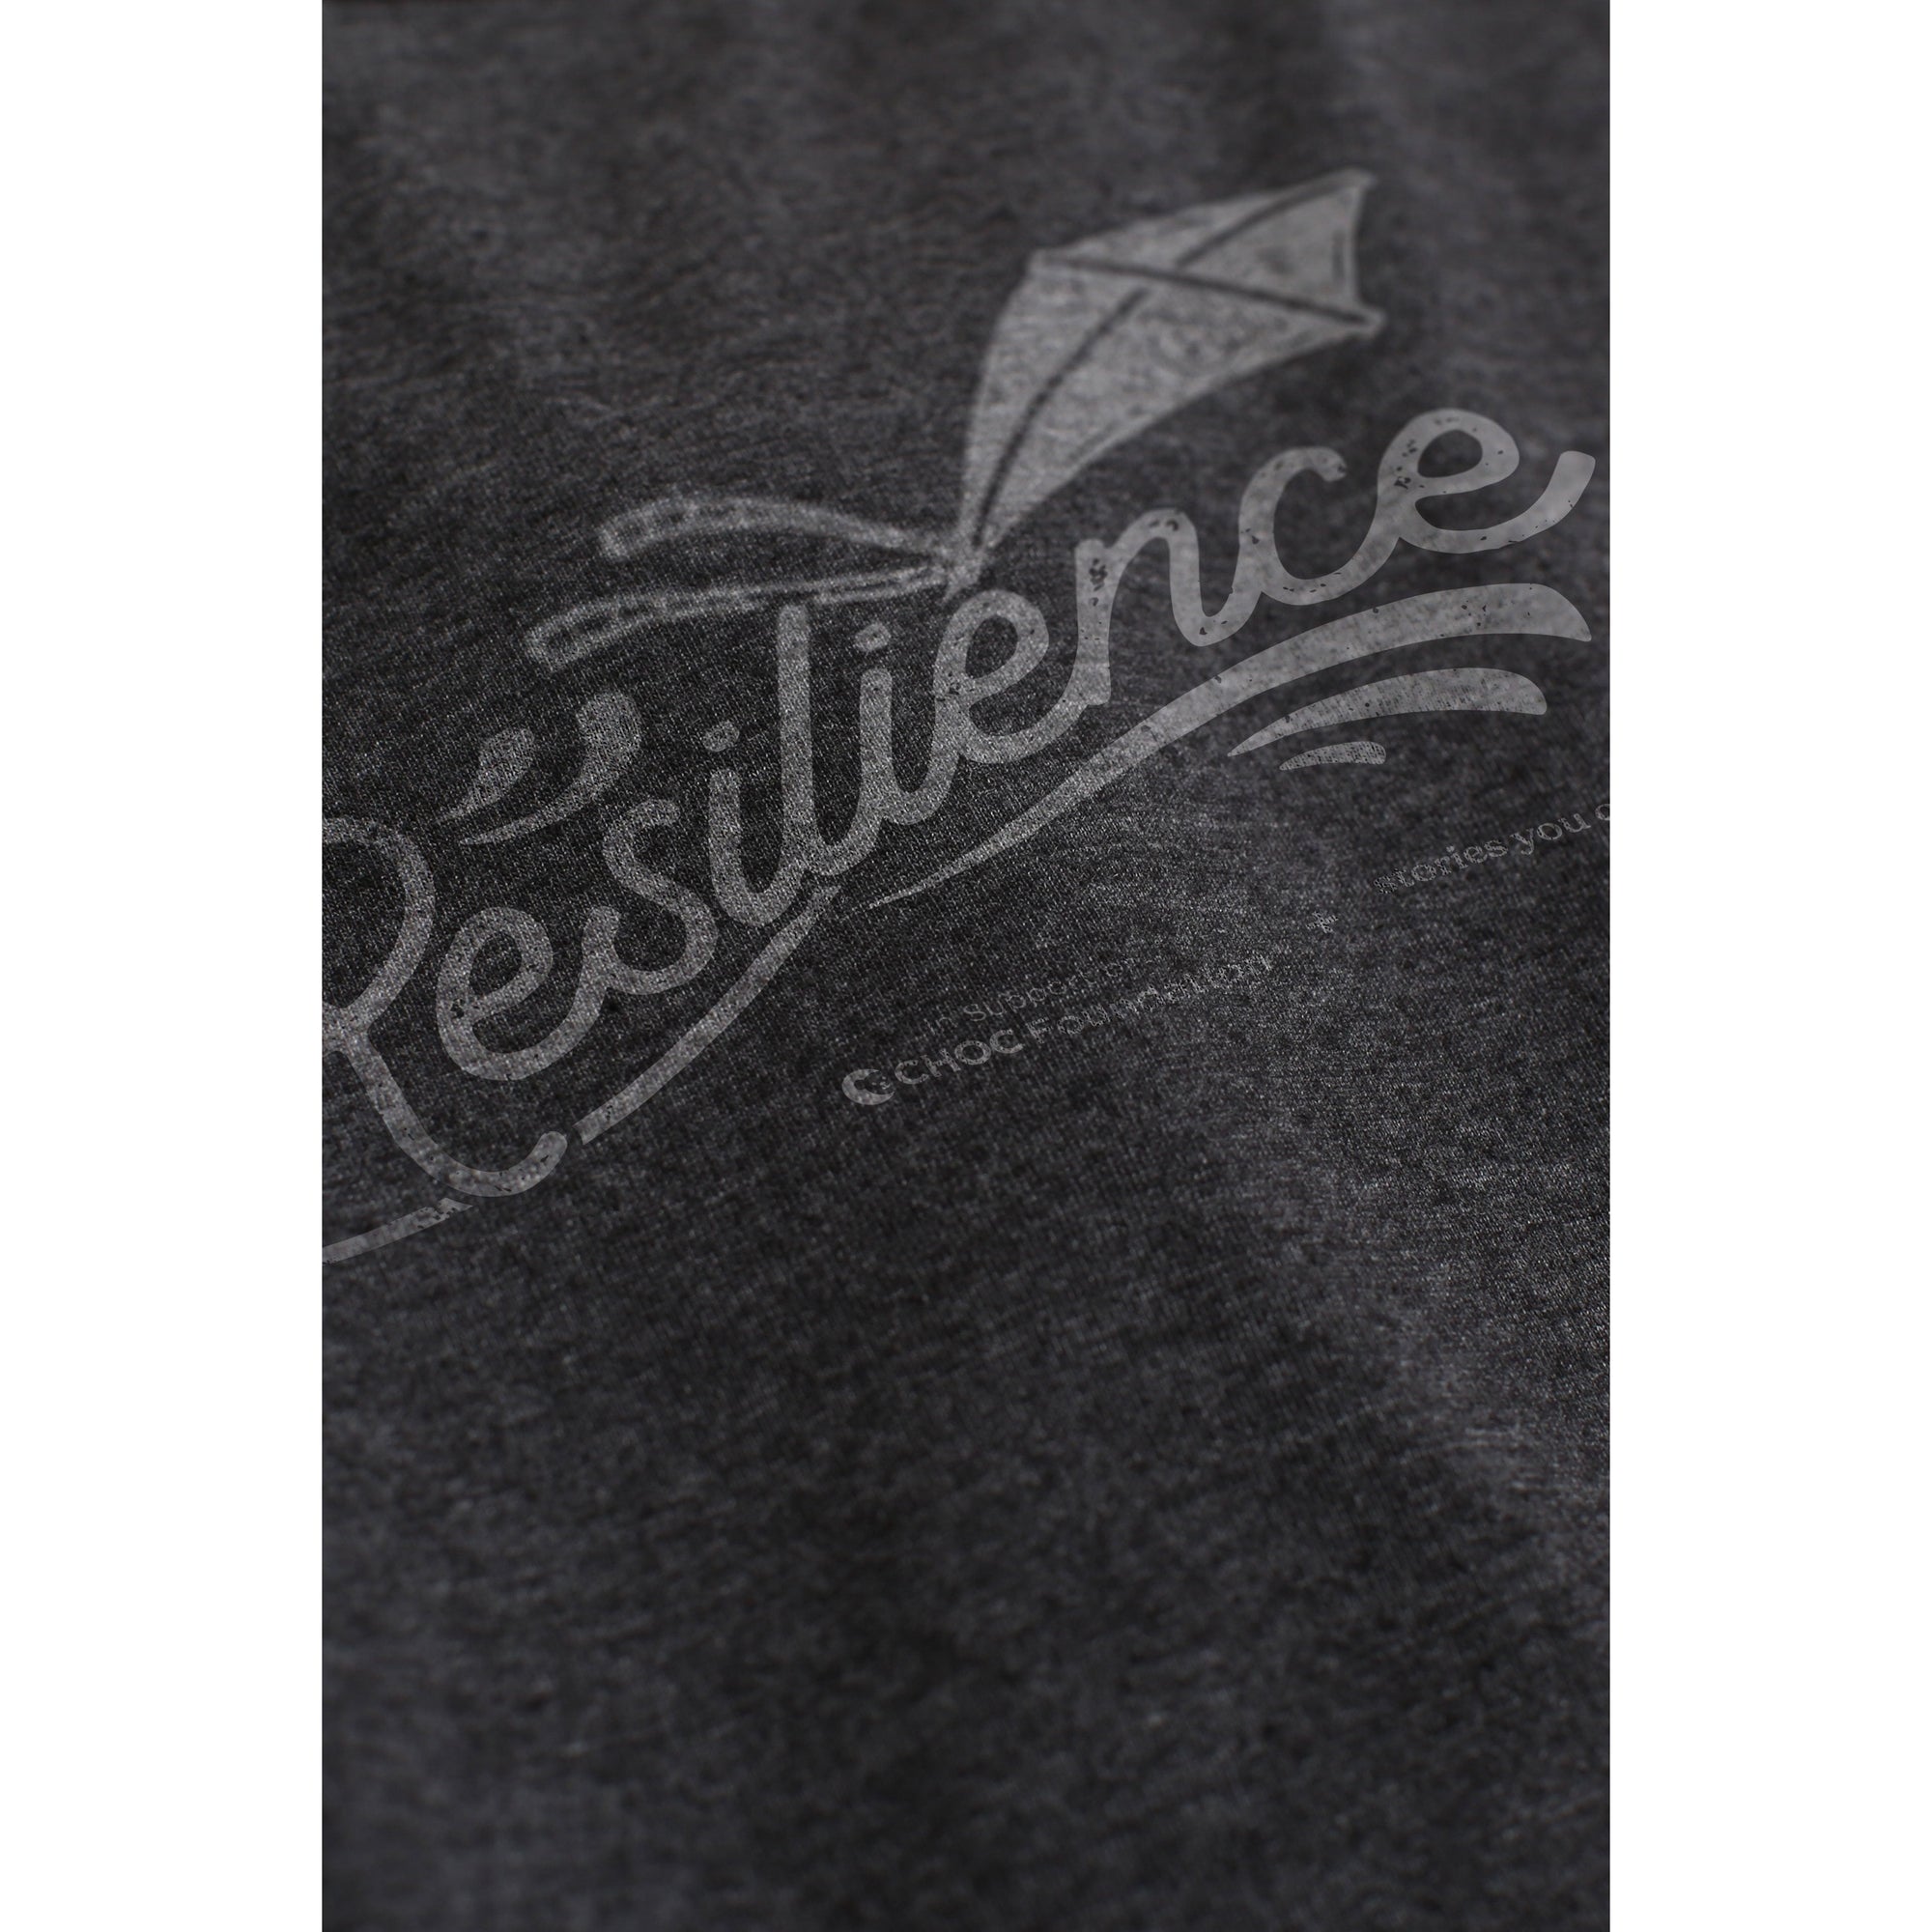 Resilience Campaign - Limited Release (Unisex Adult) - thread tank | Stories you can wear.